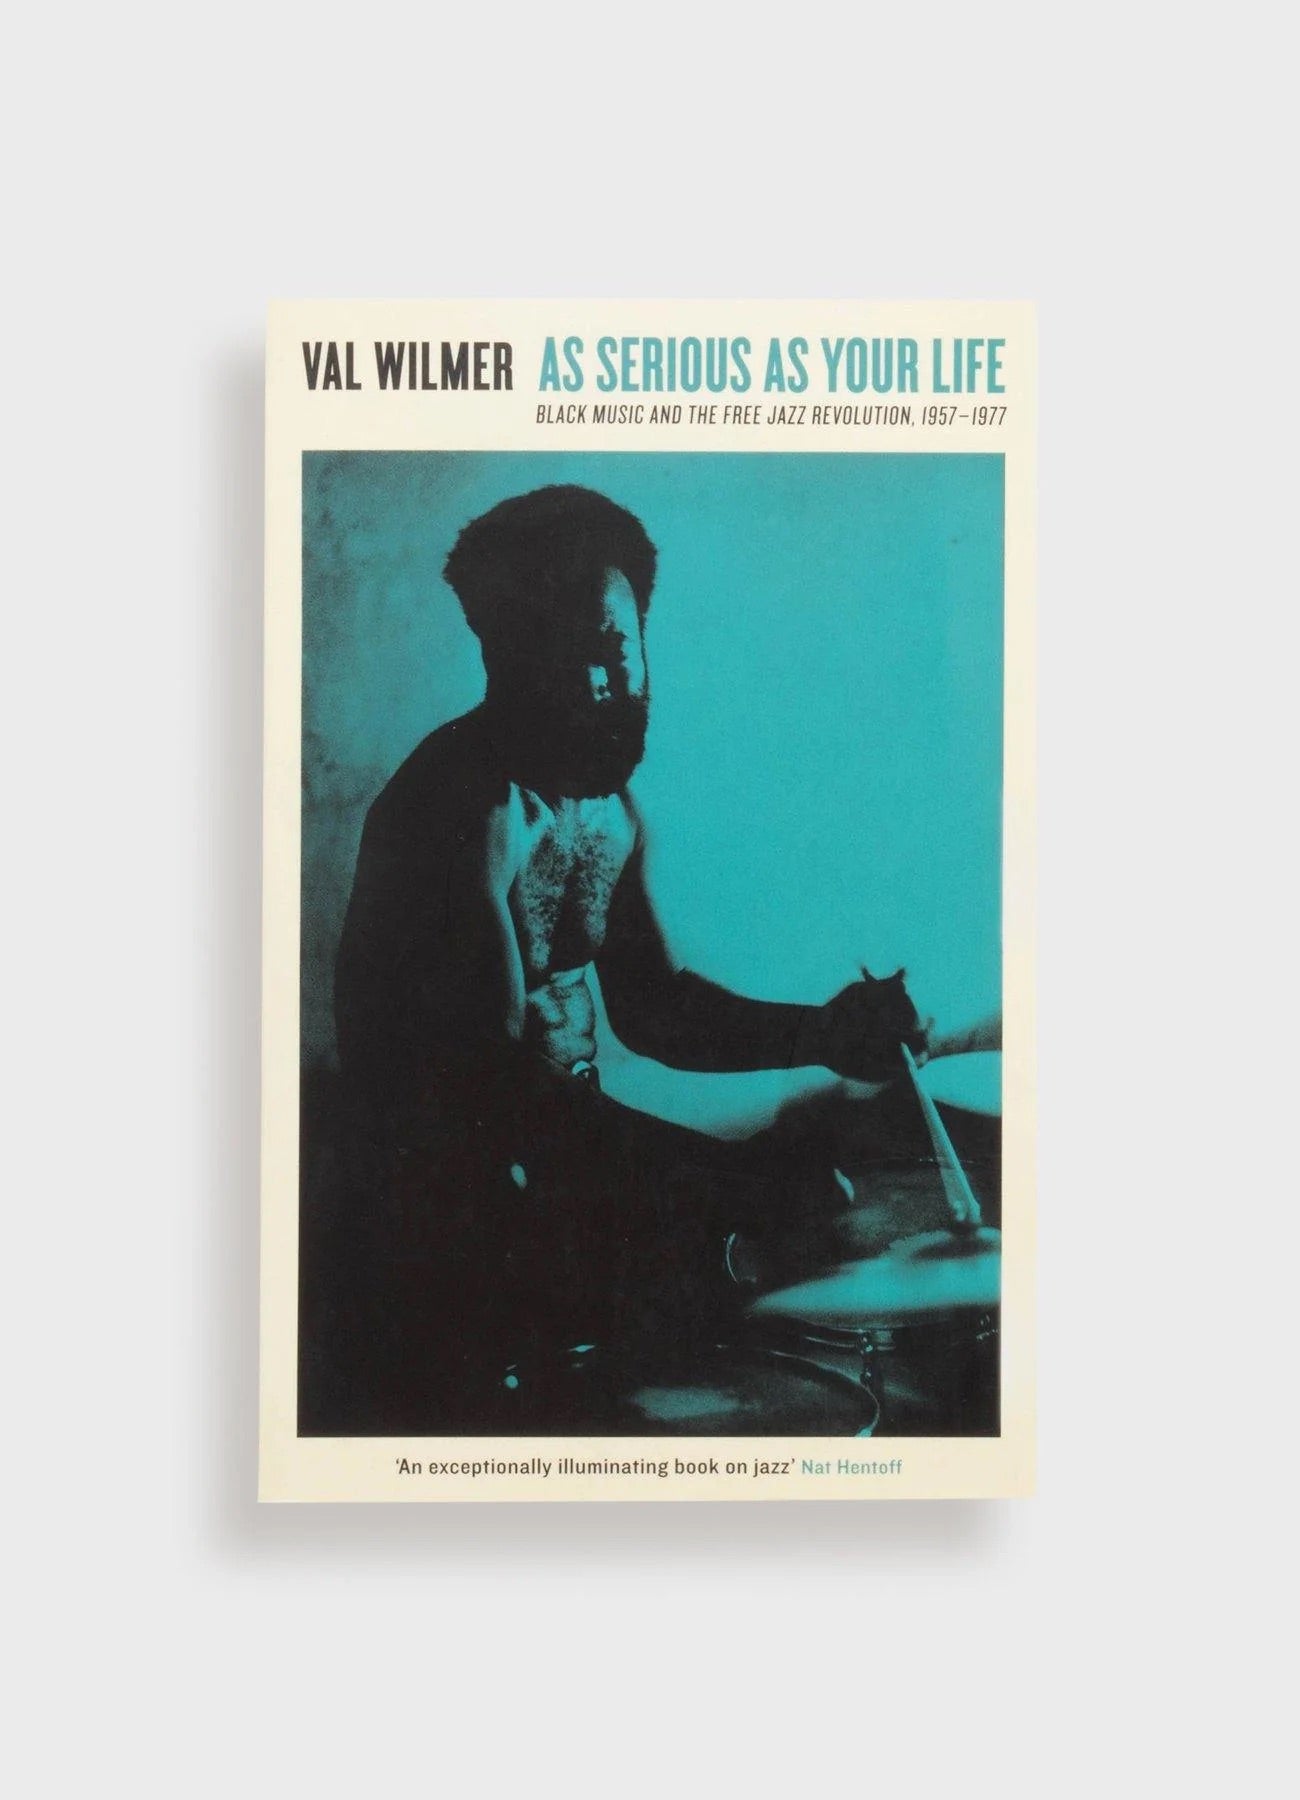 As Serious as Your Life: Black Music and the Free Jazz Revolution 1957 - 1977